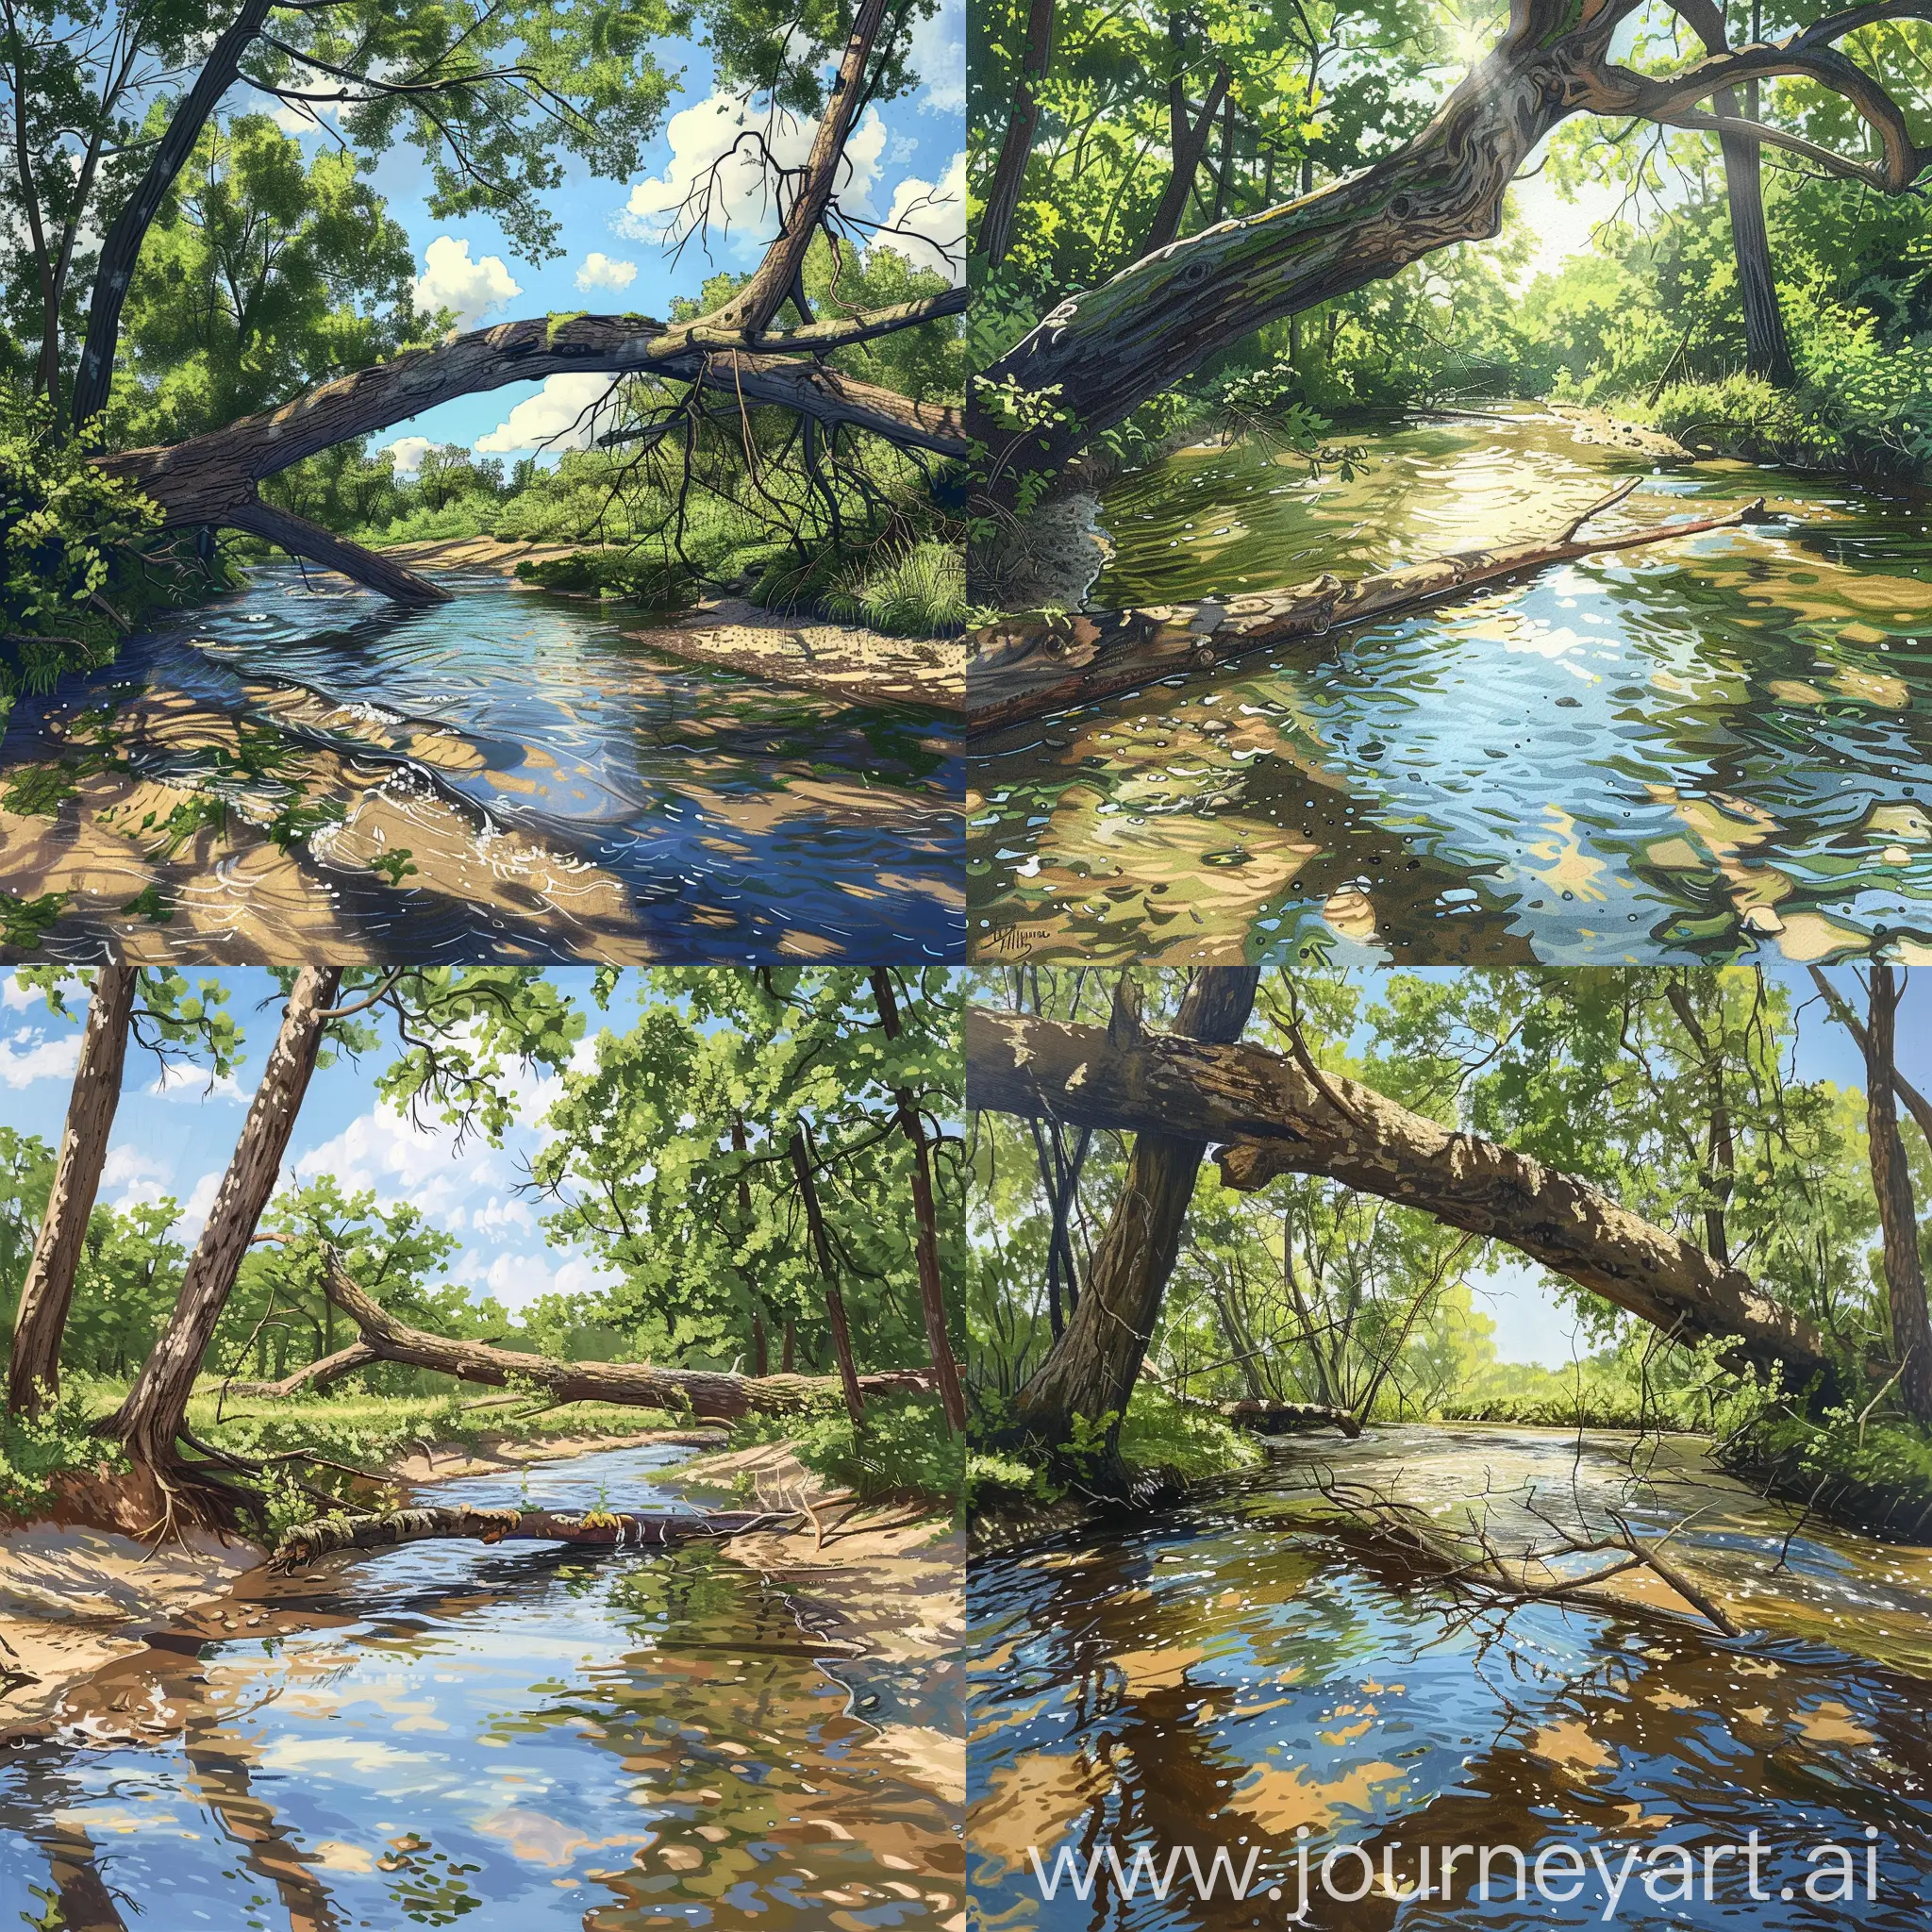 sunny day, deeper water in a creek, one tree has fallen with the trunk of the tree across the creek, the creek is wide, children's realistic art illustration